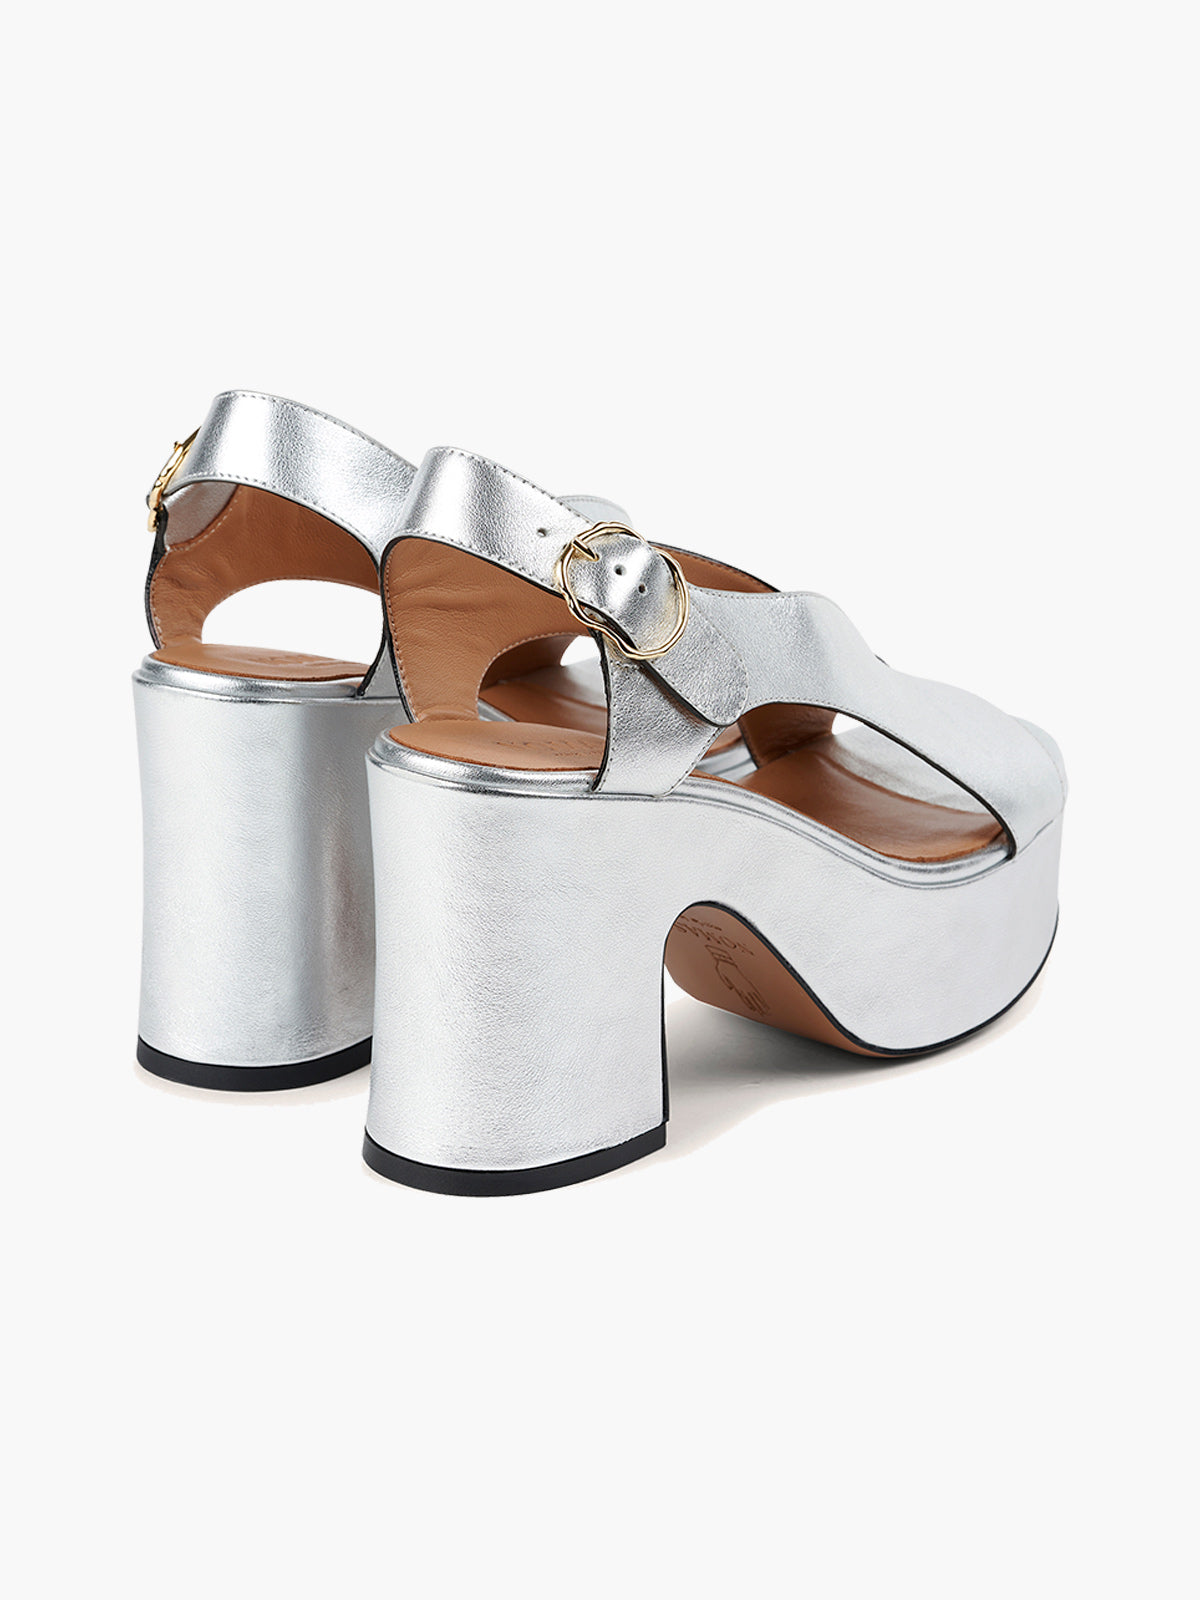 Taxi Sandals | Silver Taxi Sandals | Silver